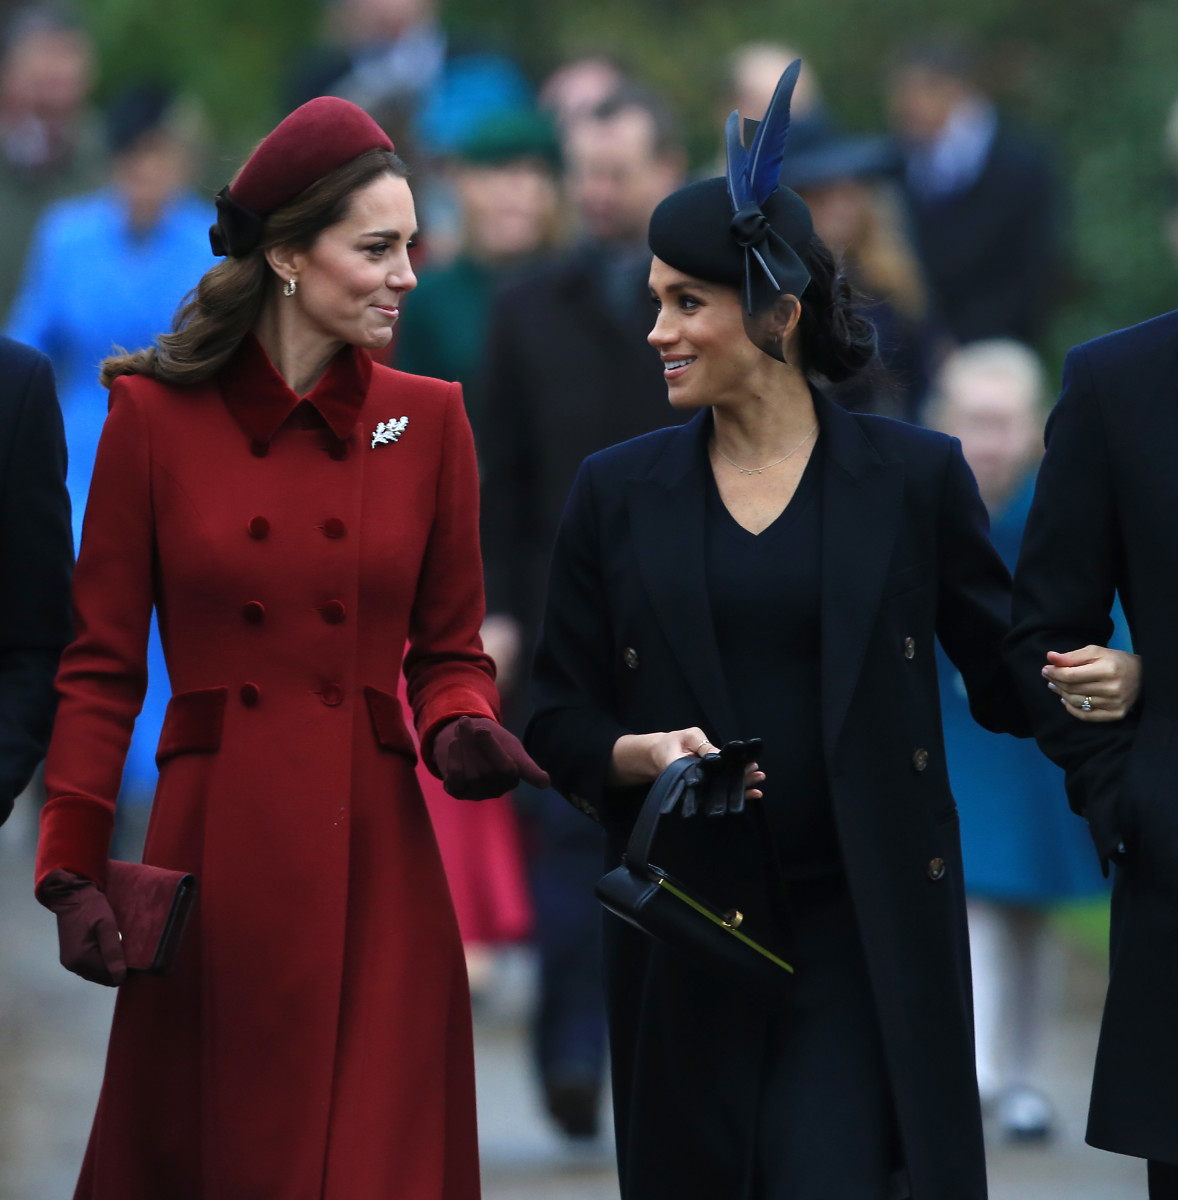 The Duchess of Cambridge and the Duchess of Sussex presumably sharing hot Christmas goss. Photo: Stephen Pond/Getty Images